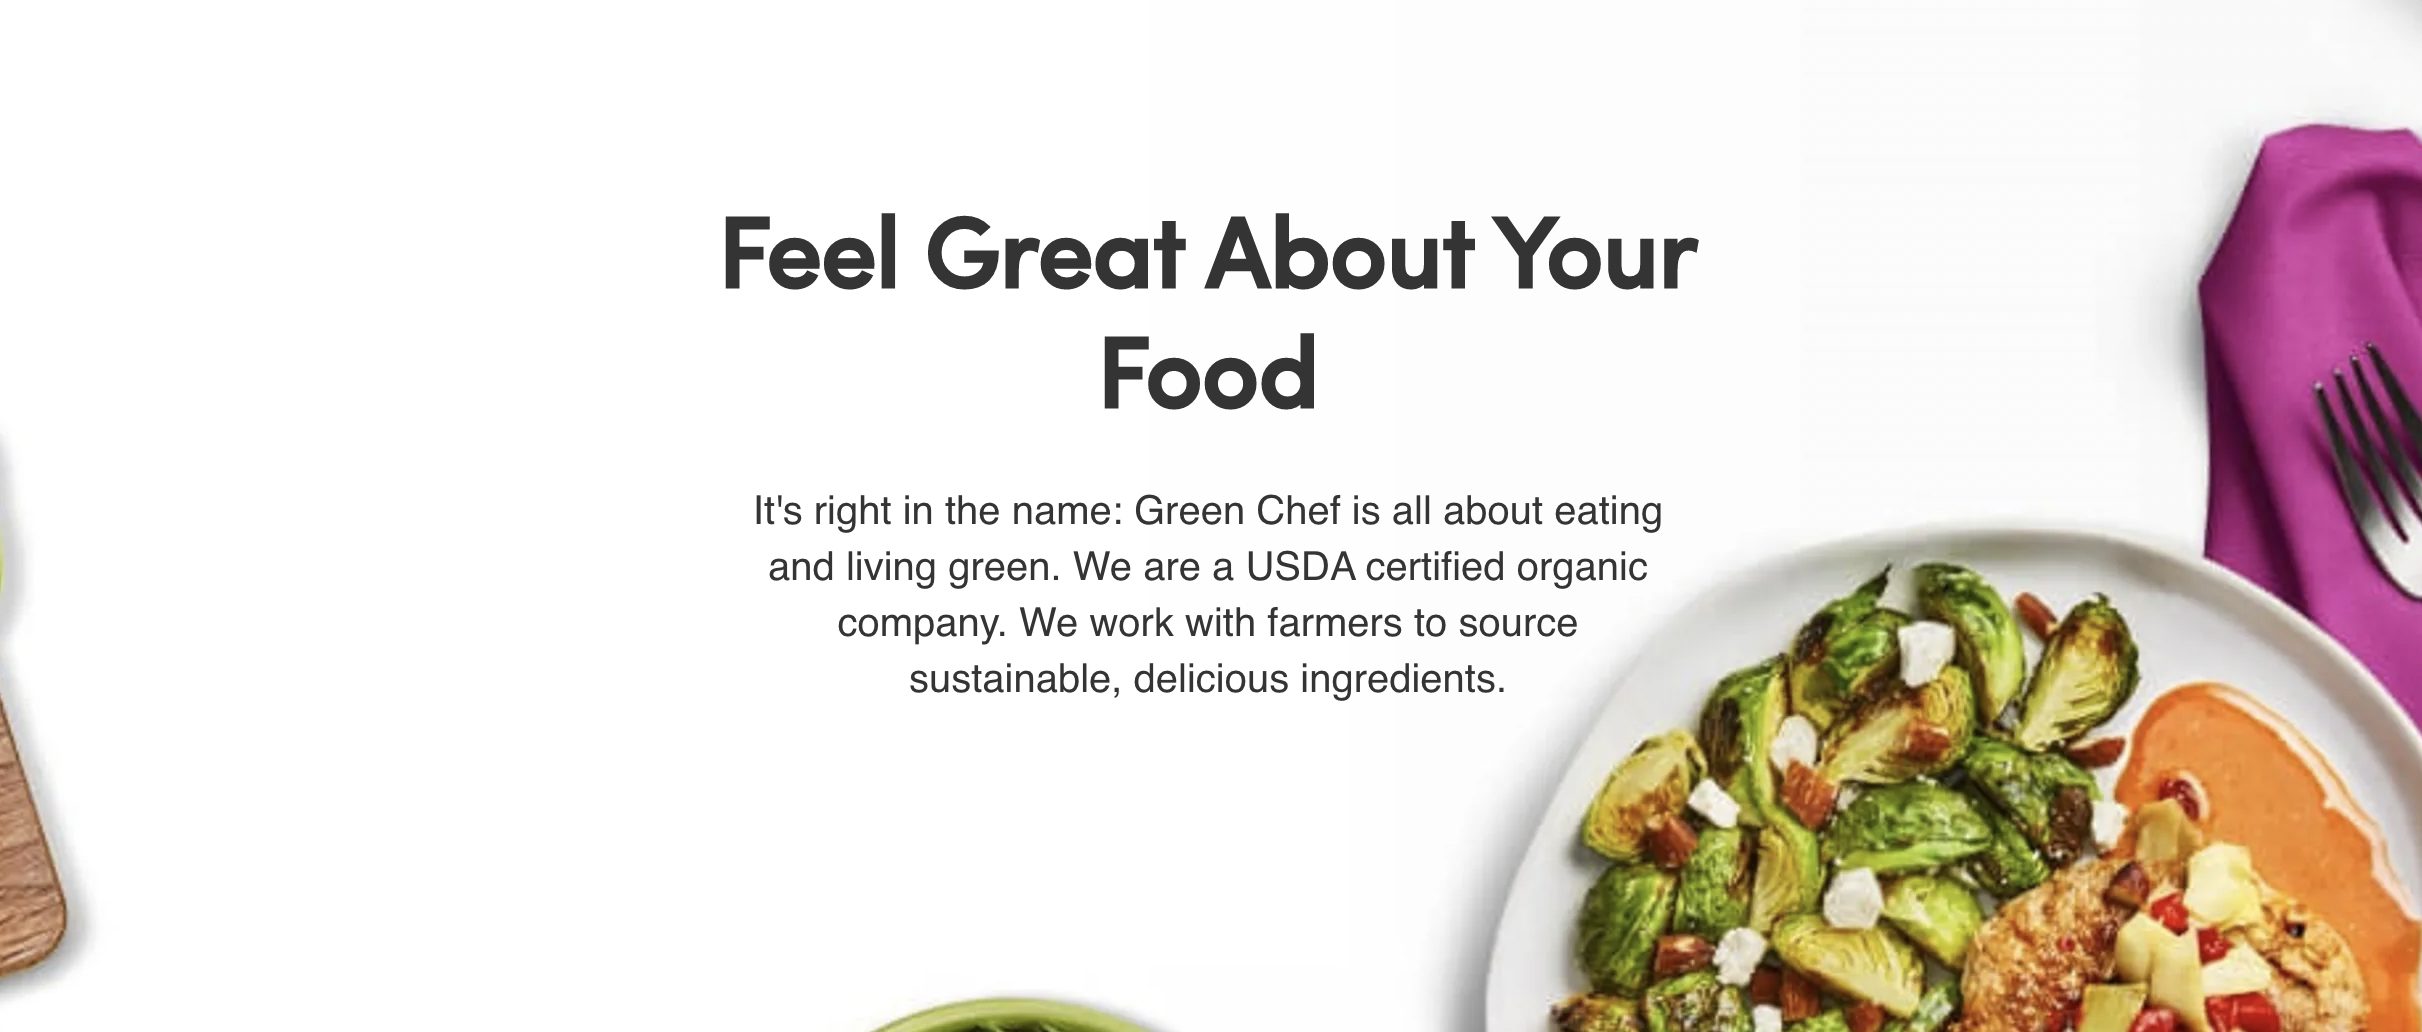 Green Chef Meal Kits